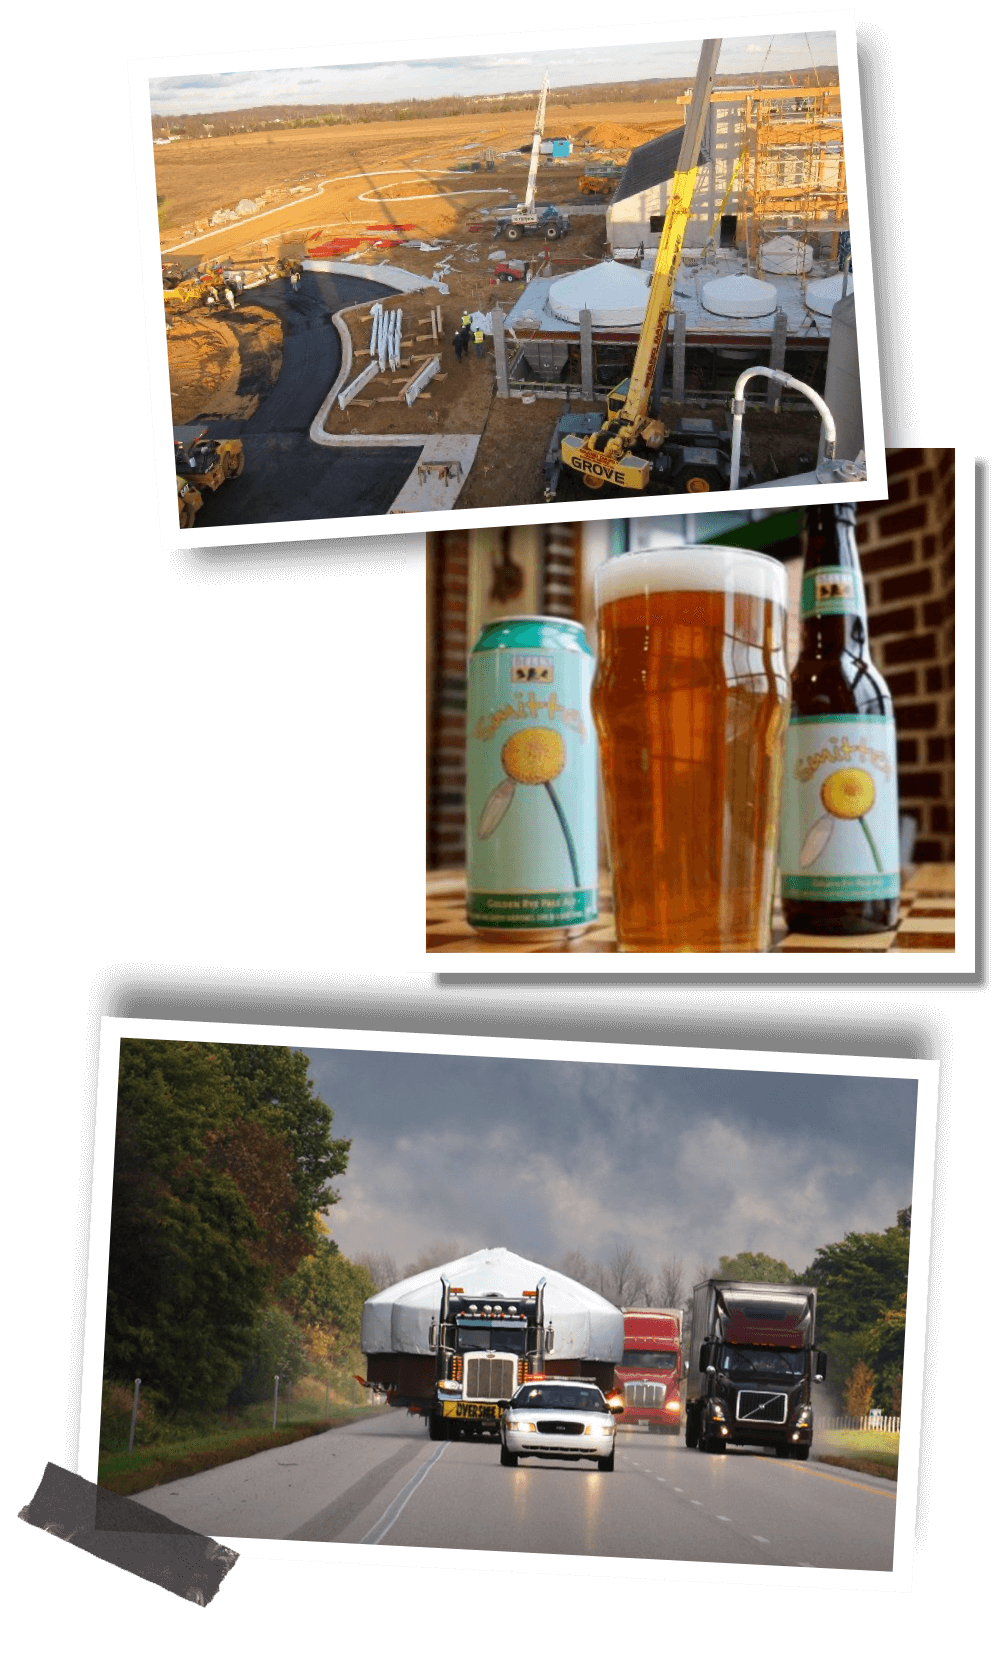 Collage of images showing construction, can and bottle of Golden Rye Ale (now known as Smitten)